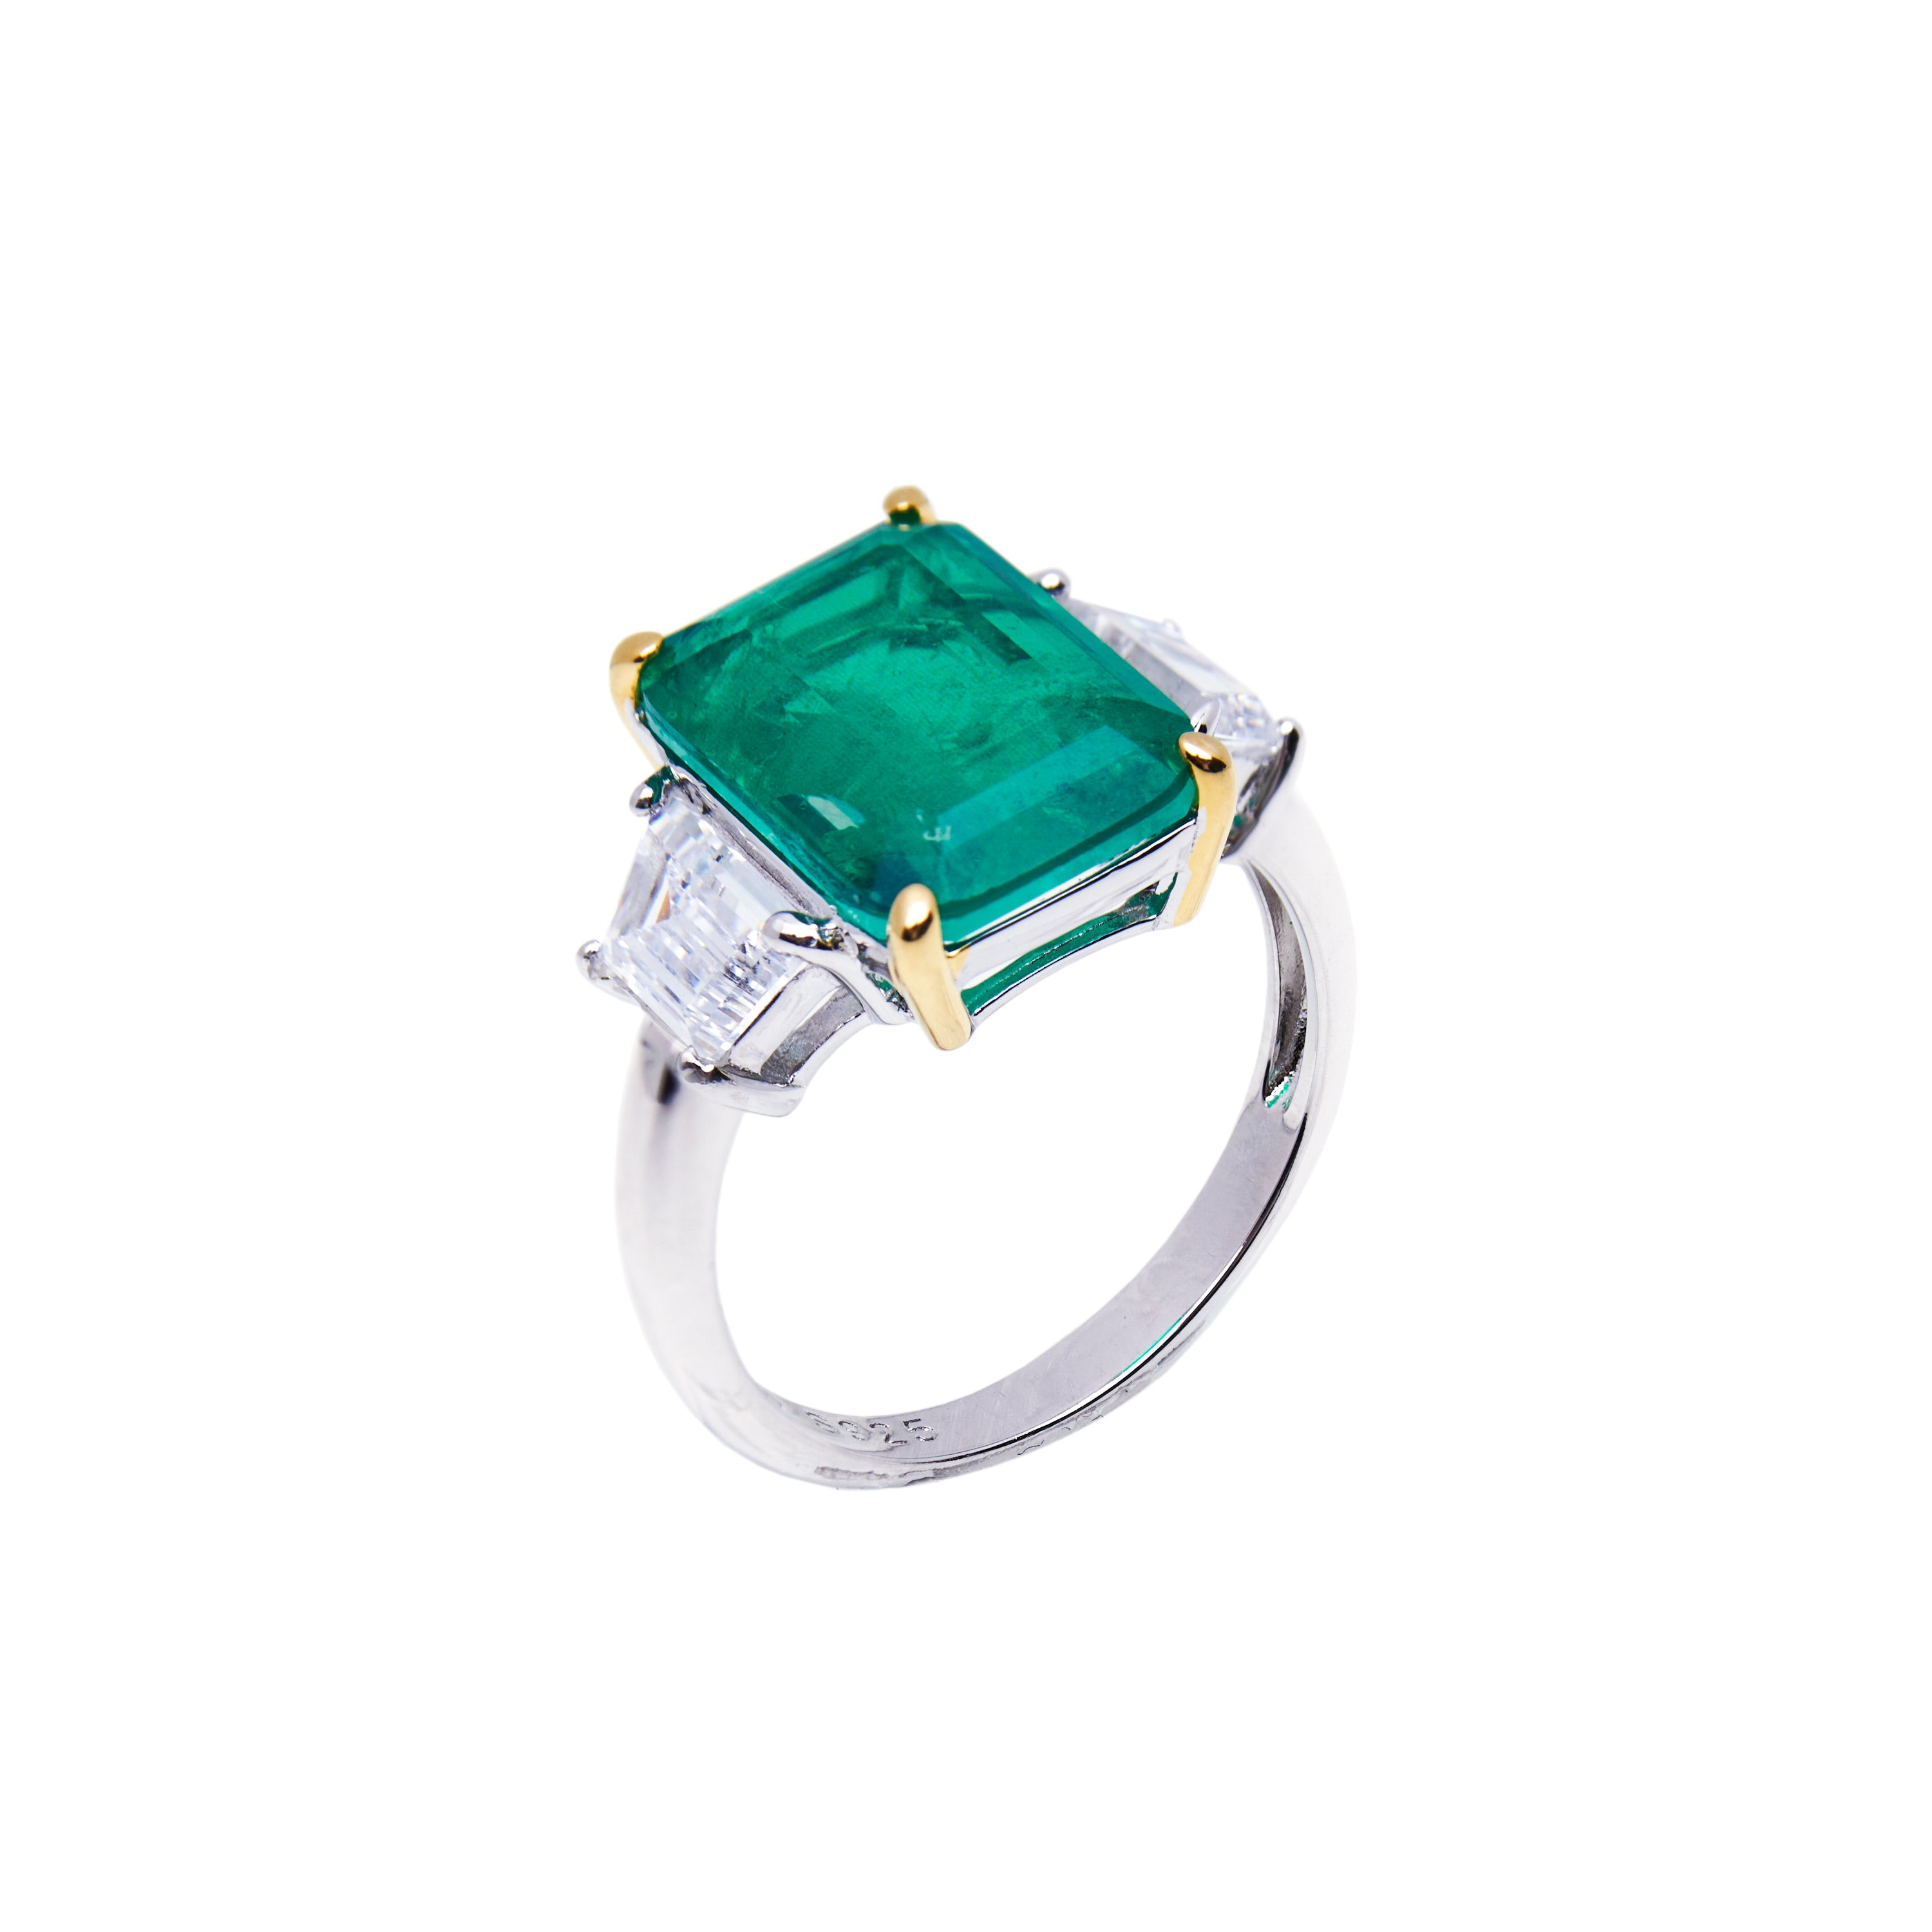 Sterling silver large emerald with trapezoid sides